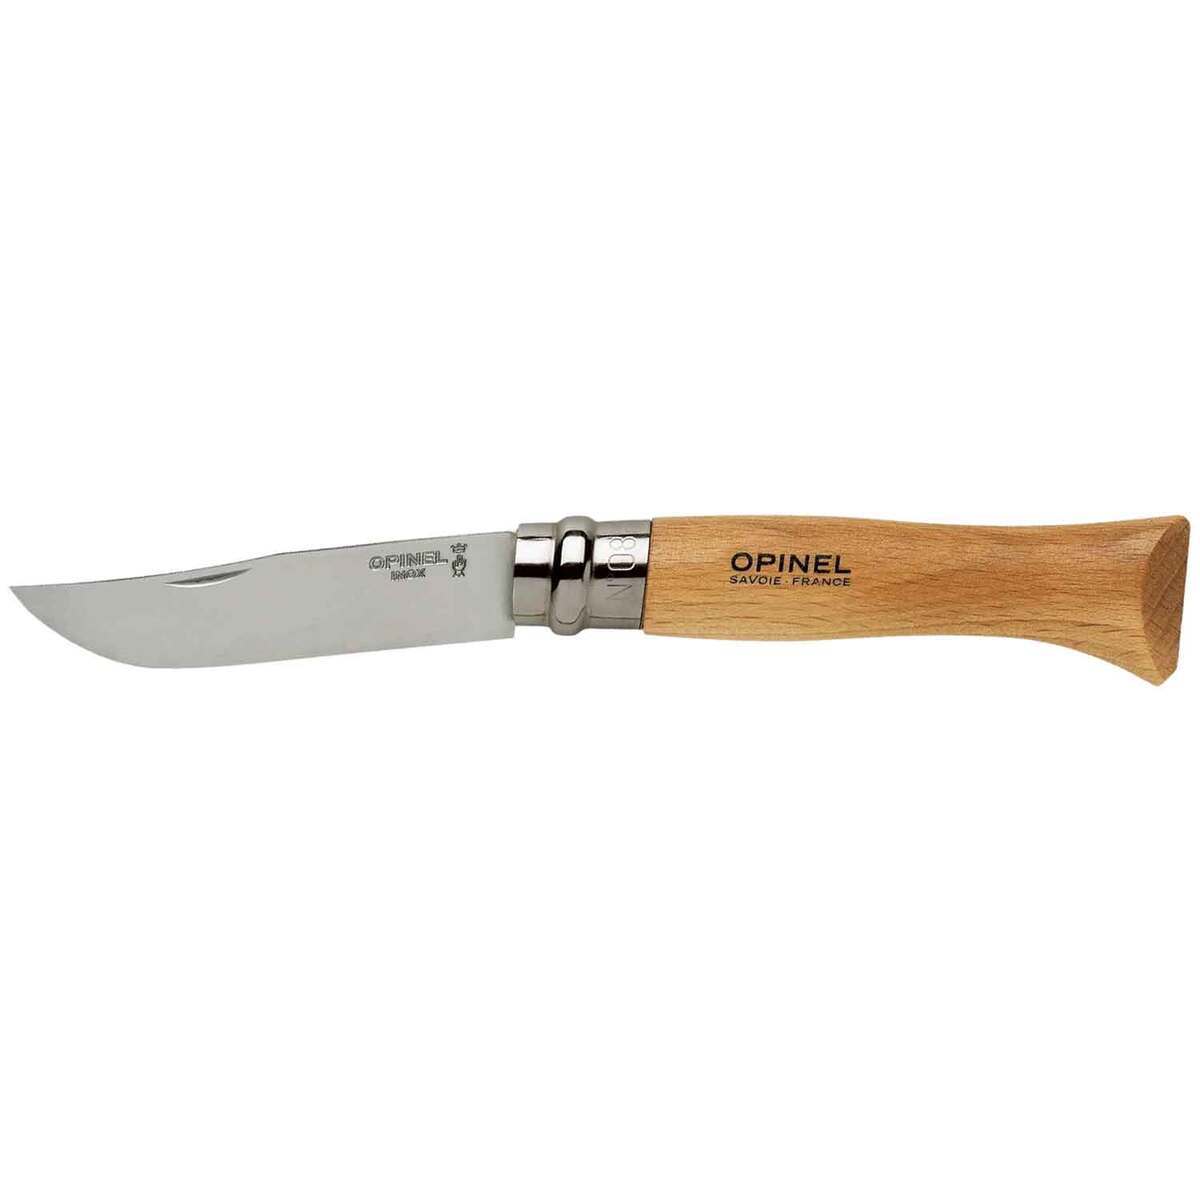 Opinel No.08 Stainless Steel 3.28 inch Folding Knife - Beech | Knives.com